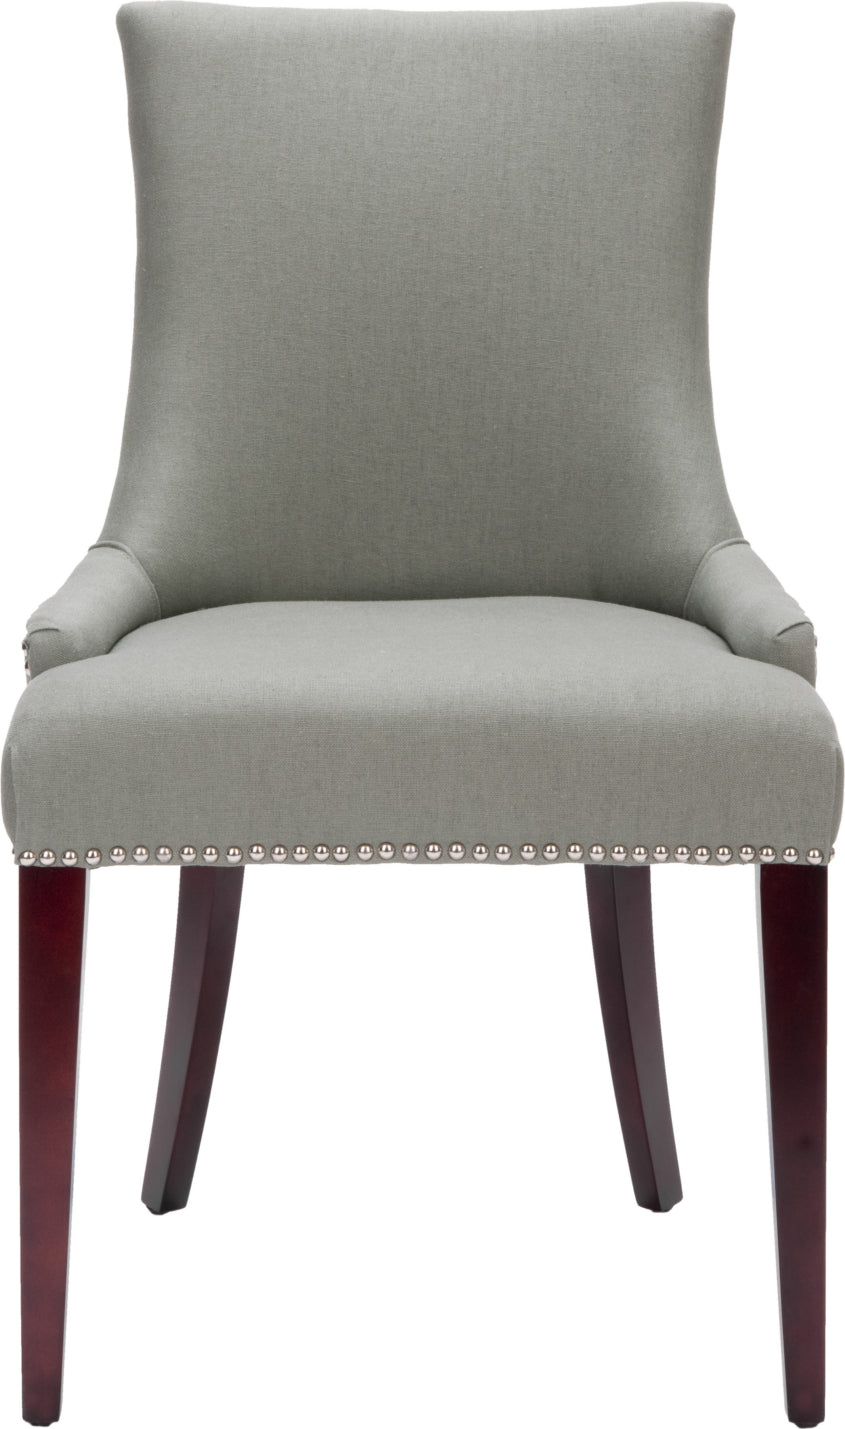 Safavieh Becca 19''H Leather Side Chair-Silver Nail Heads Sea Mist and Cherry Mahogany Furniture main image